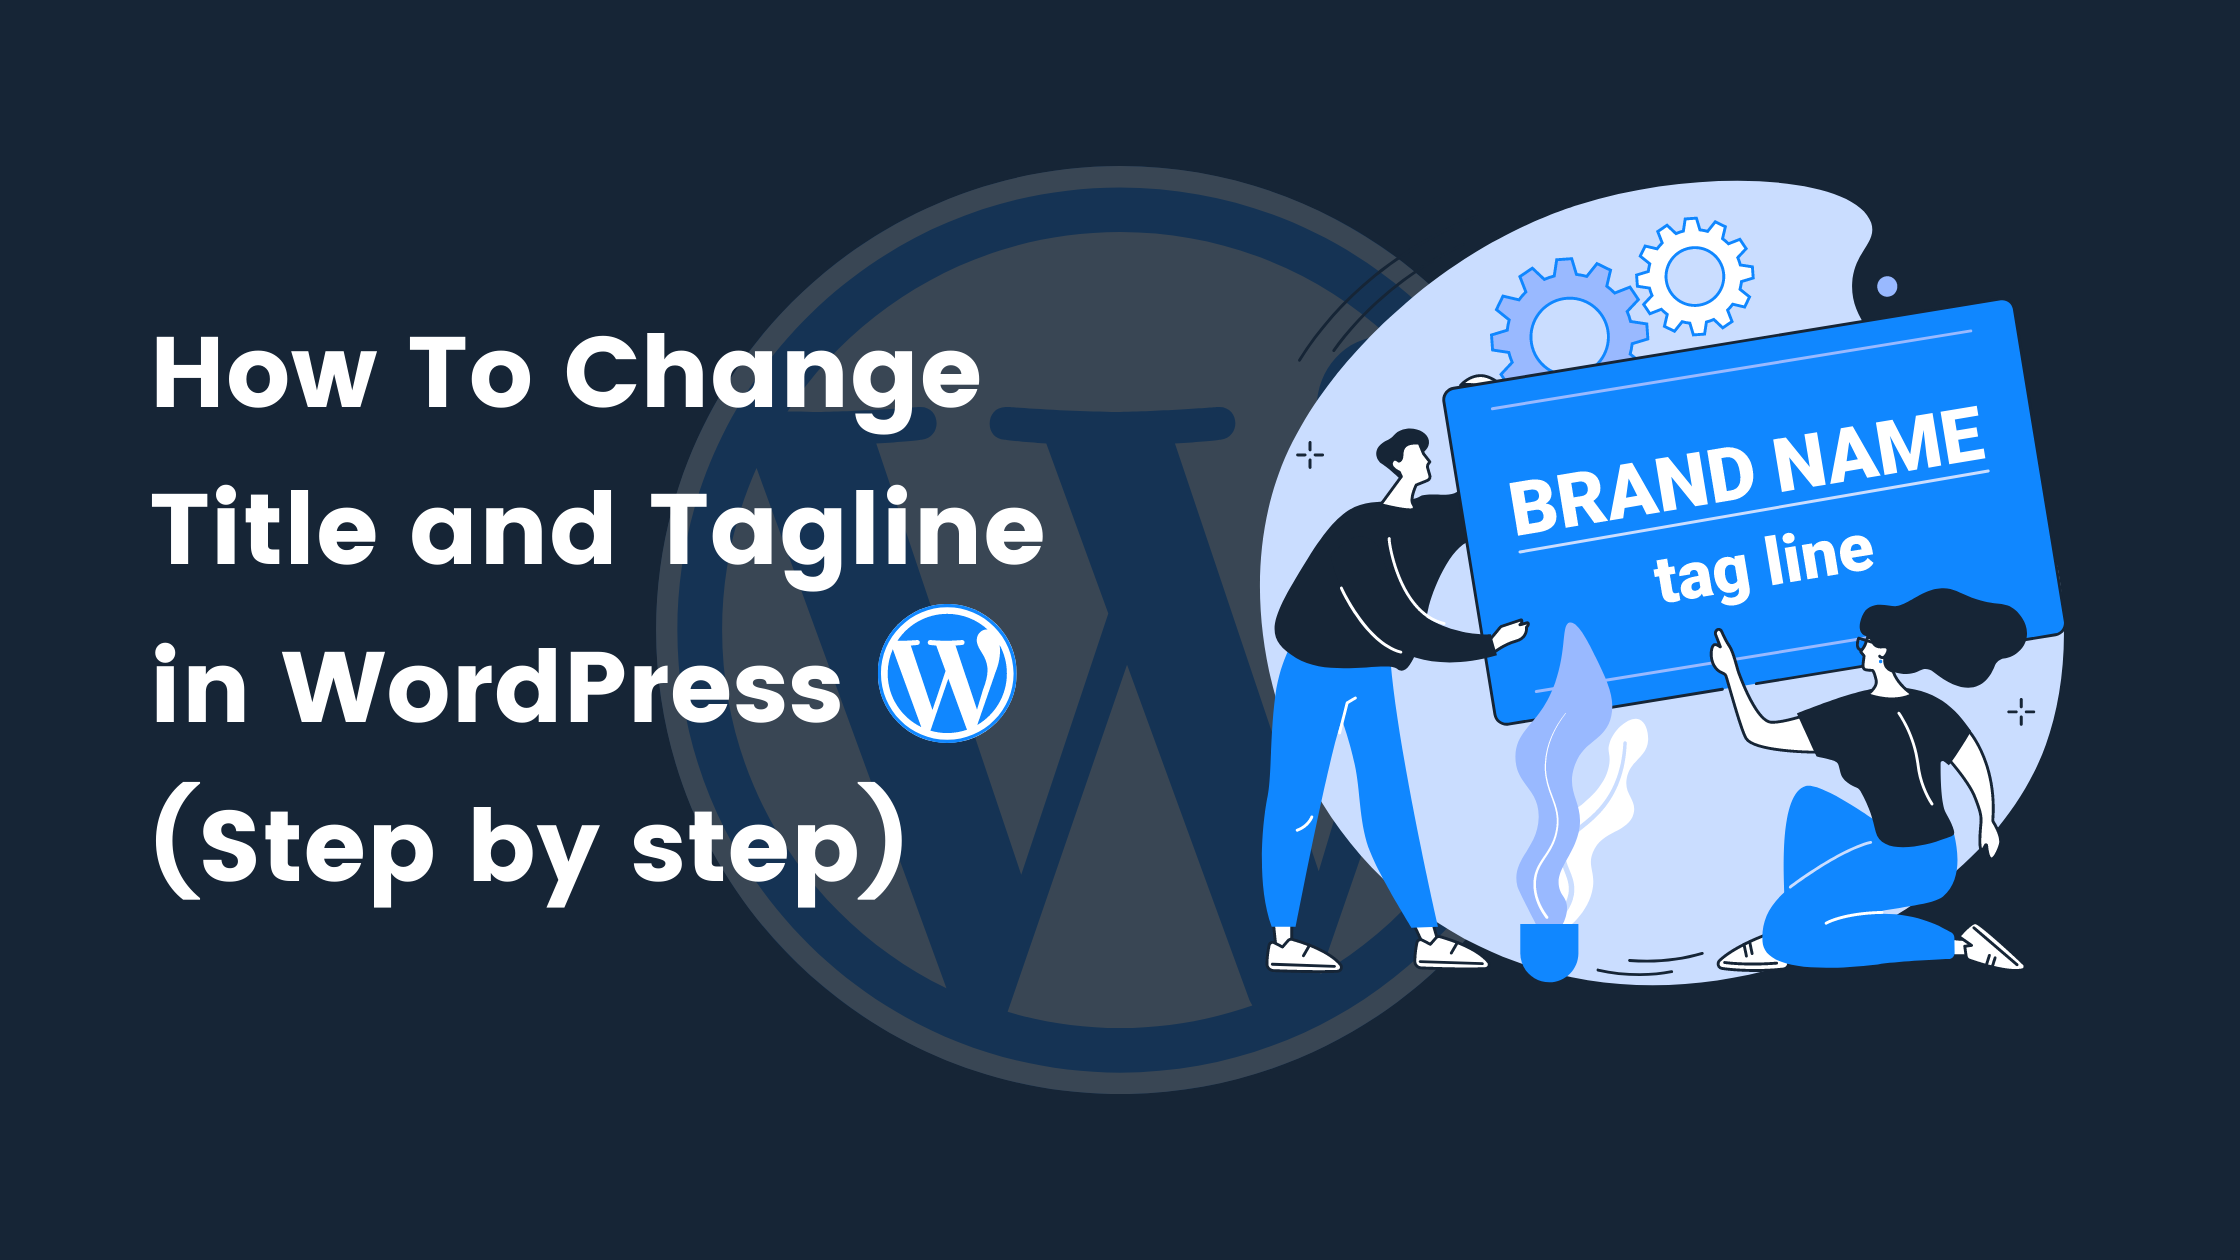 How To Change Site Title and Tagline in WordPress